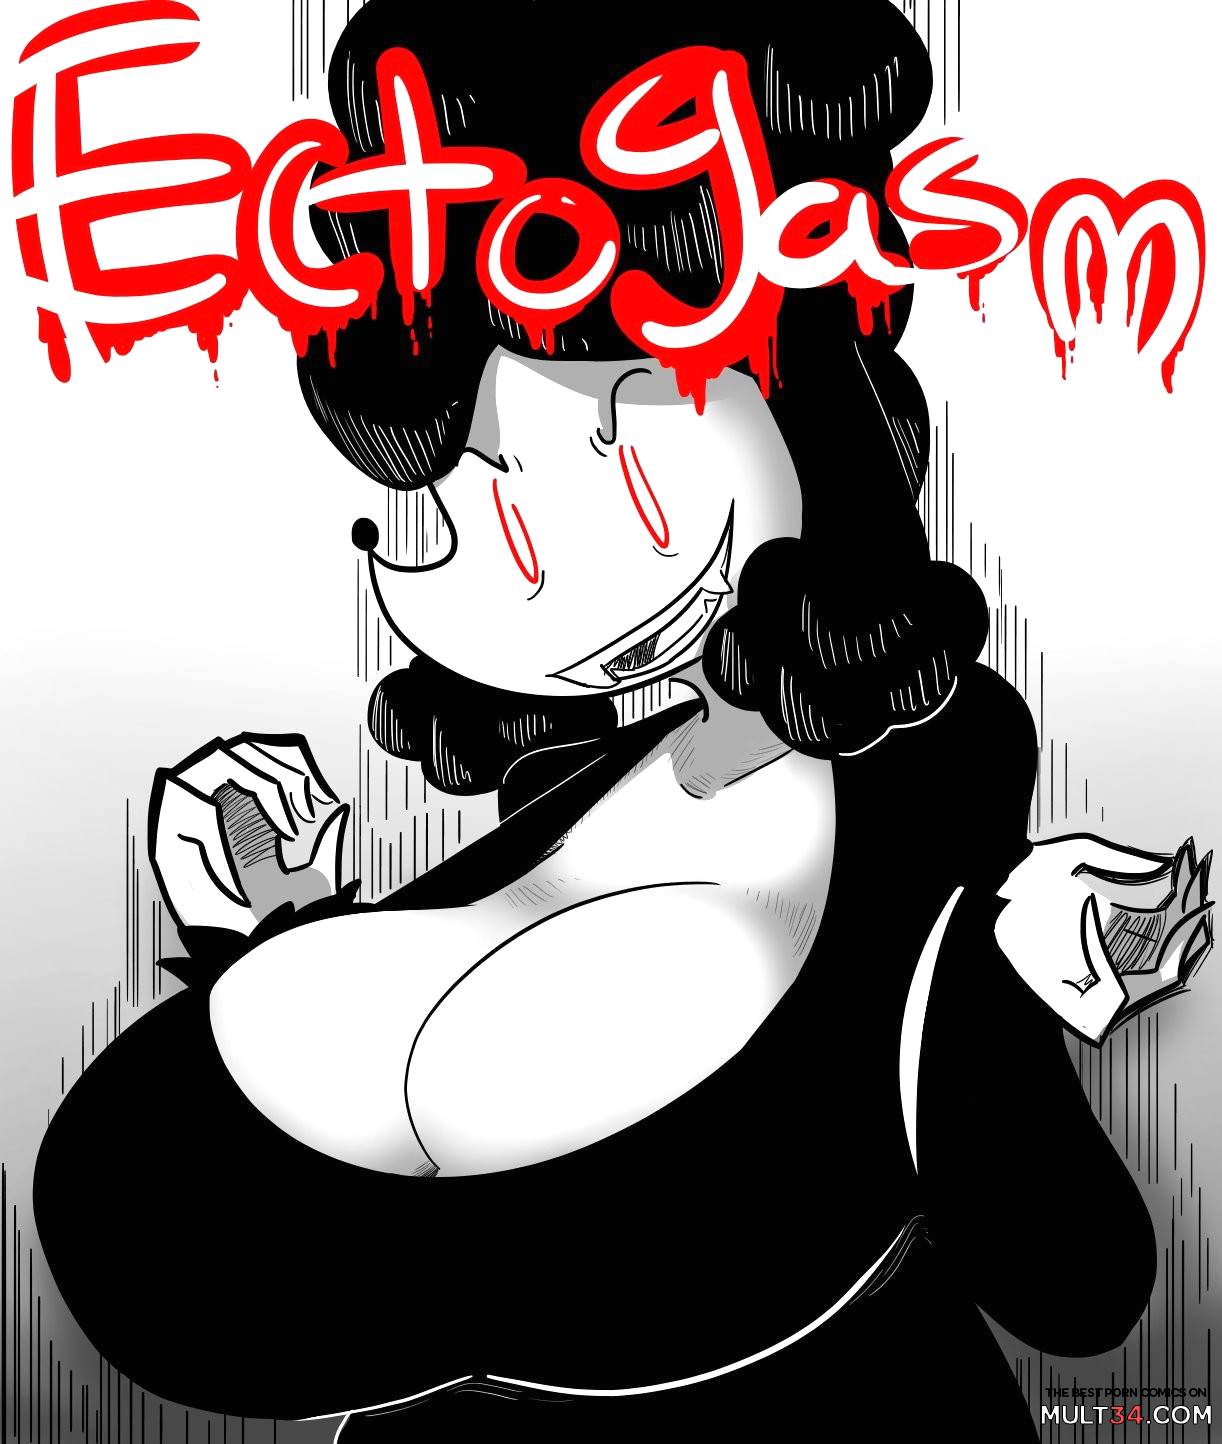 Ectogasm page 1